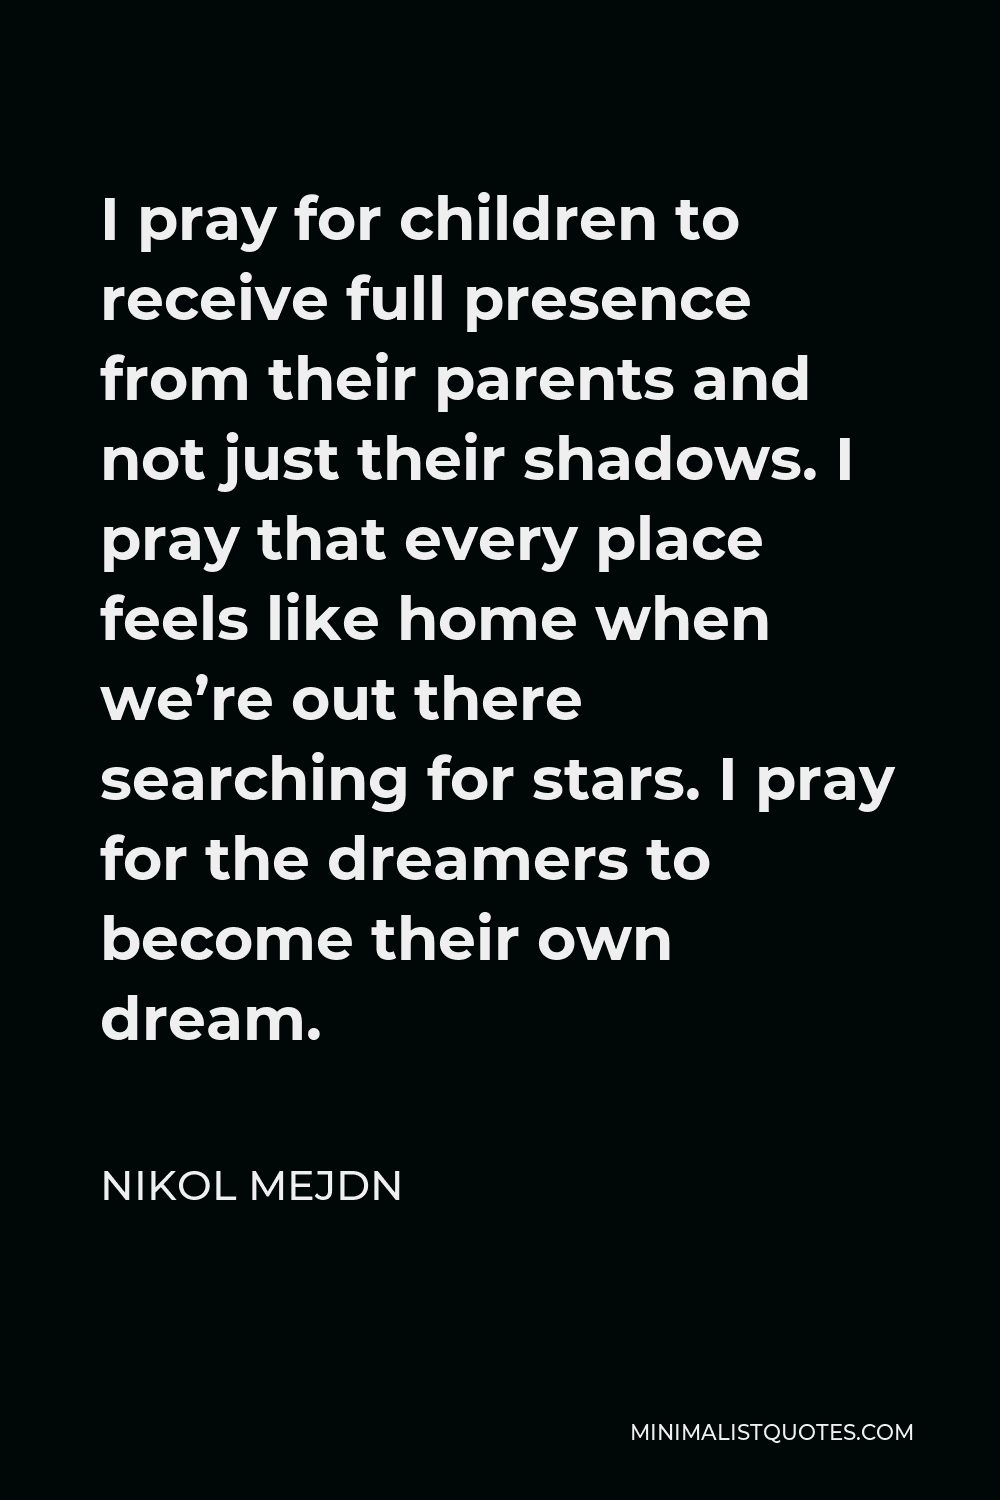 Nikol Mejdn Quote - I pray for children to receive full presence from their parents and not just their shadows. I pray that every place feels like home when we’re out there searching for stars. I pray for the dreamers to become their own dream.